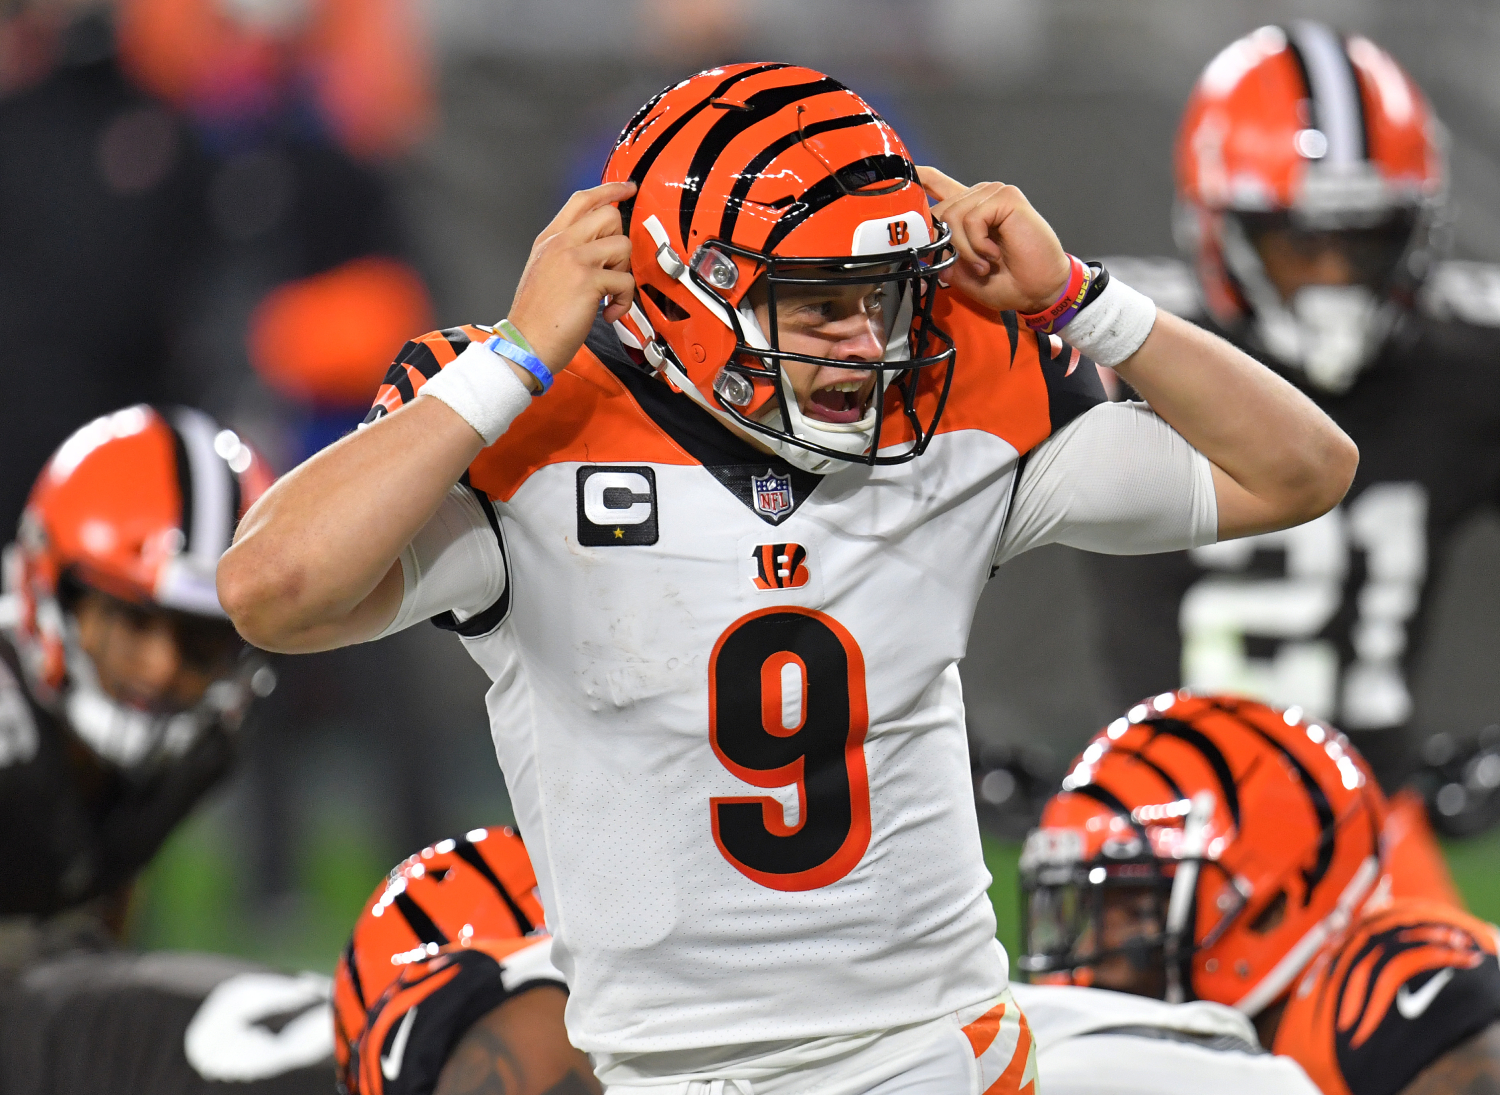 Joe Burrow has played really well for the Cincinnati Bengals. His play has been so good that he has received praise from LeBron James.